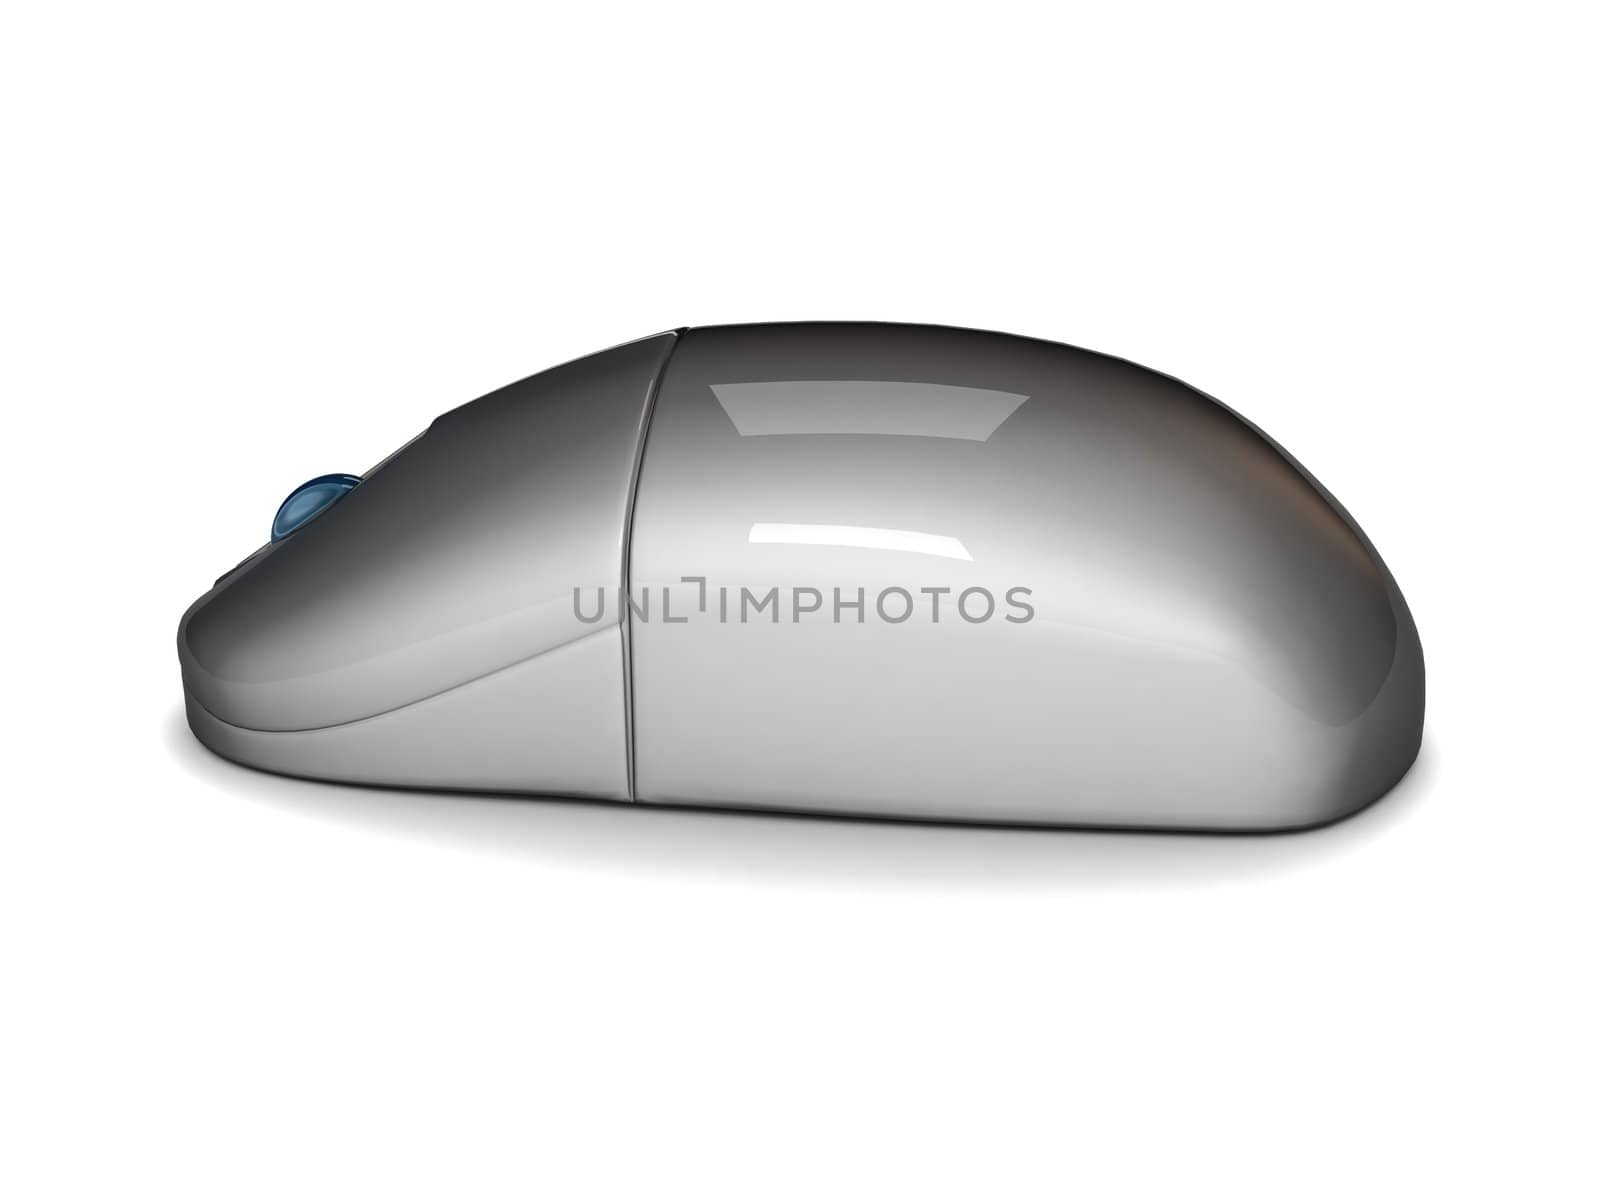 three dimensional electronic mouse against white background

